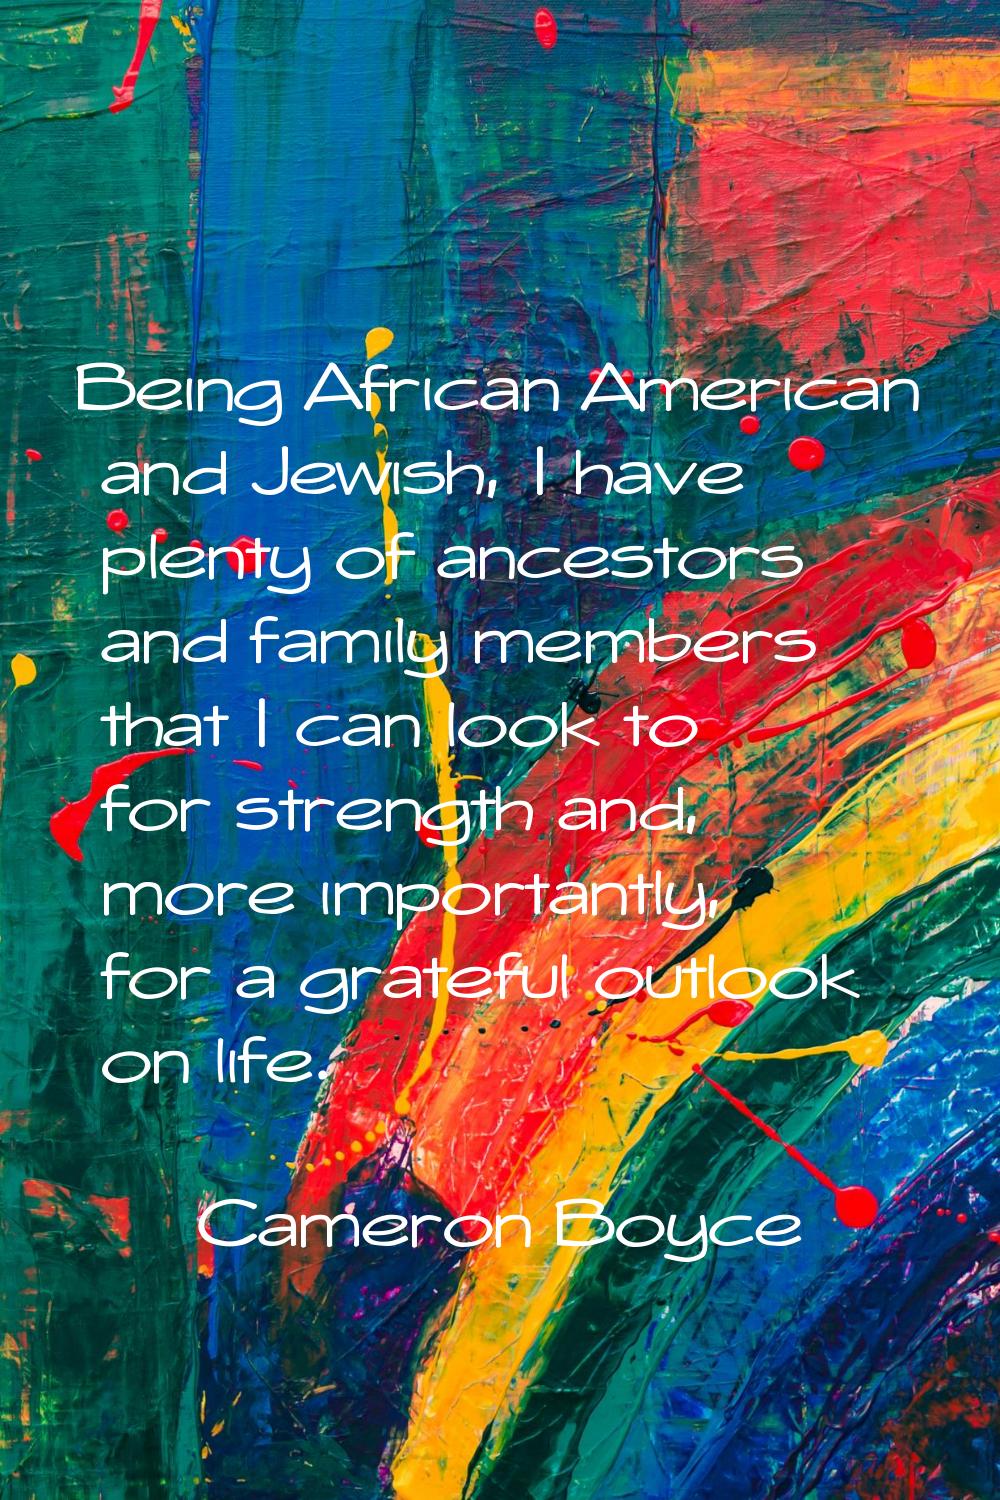 Being African American and Jewish, I have plenty of ancestors and family members that I can look to